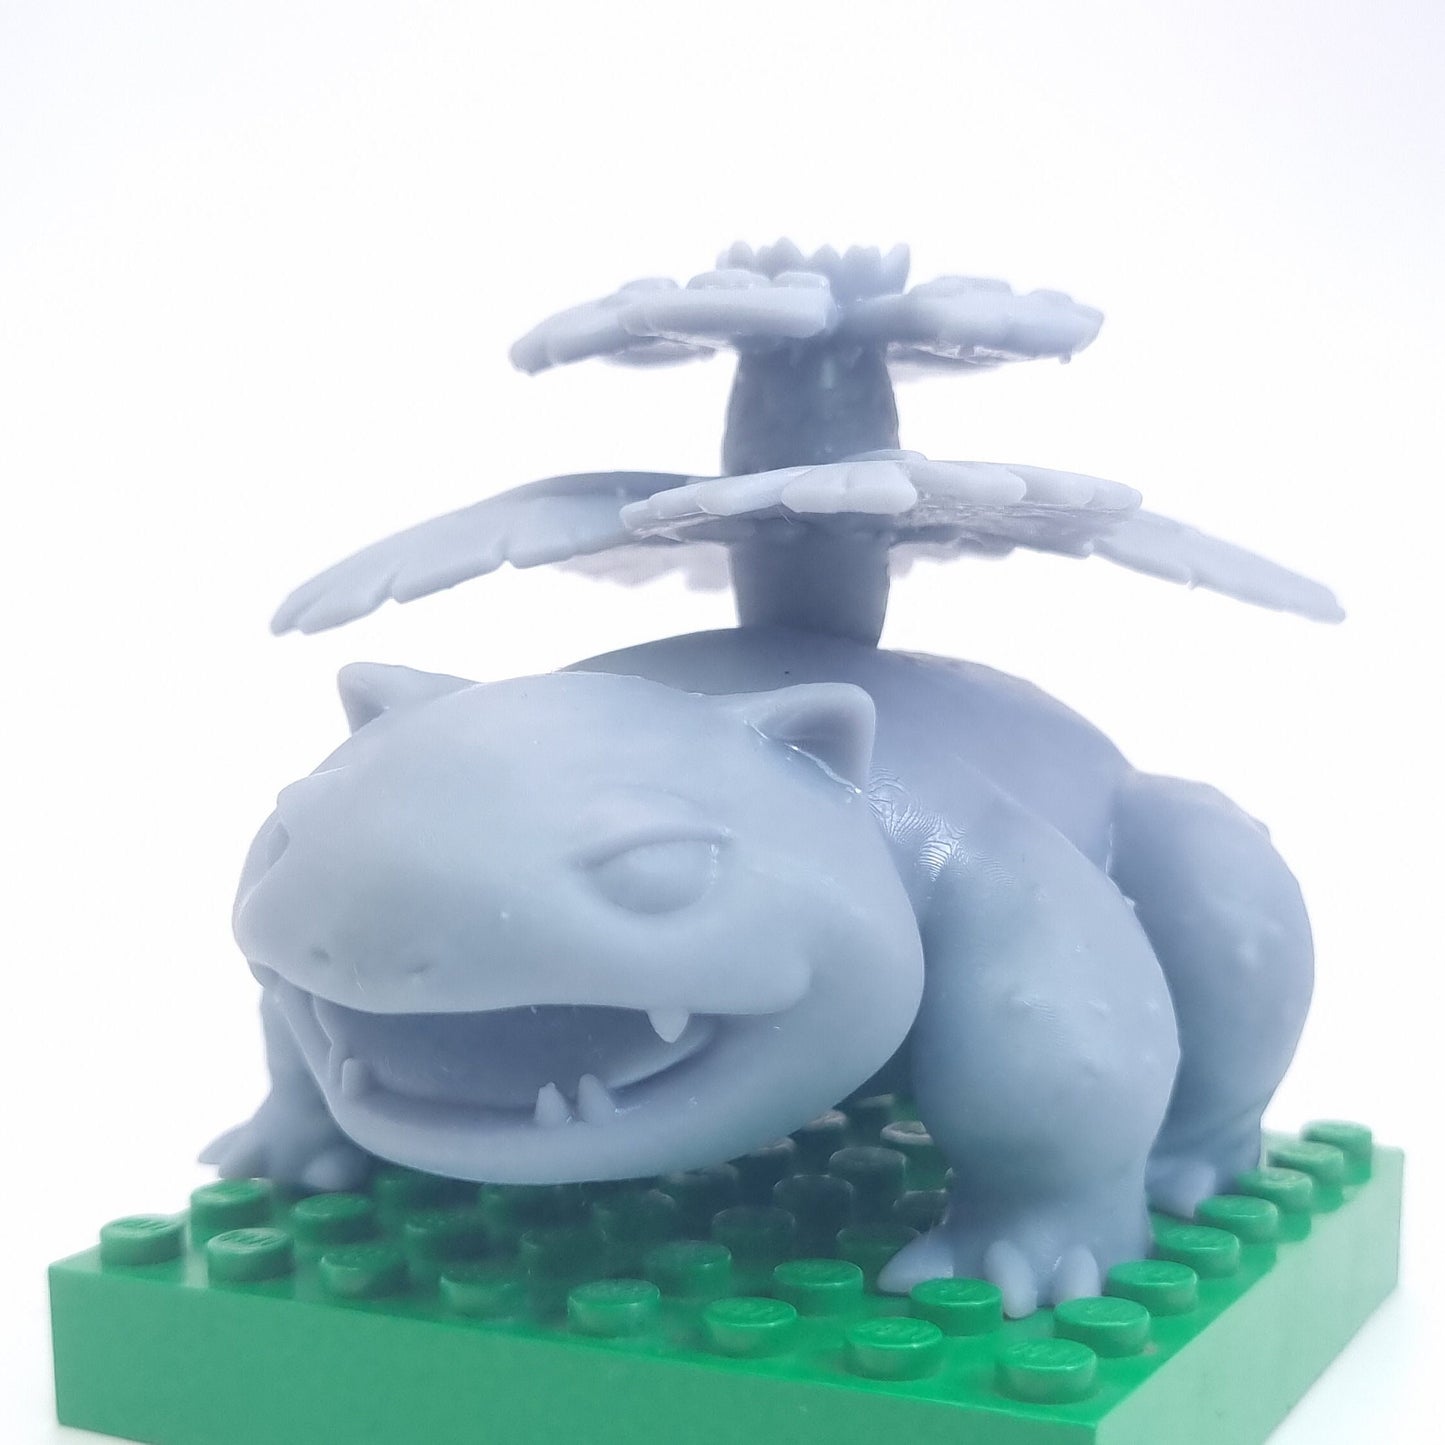 Building toy custom 3D printed creature with tree on his back!